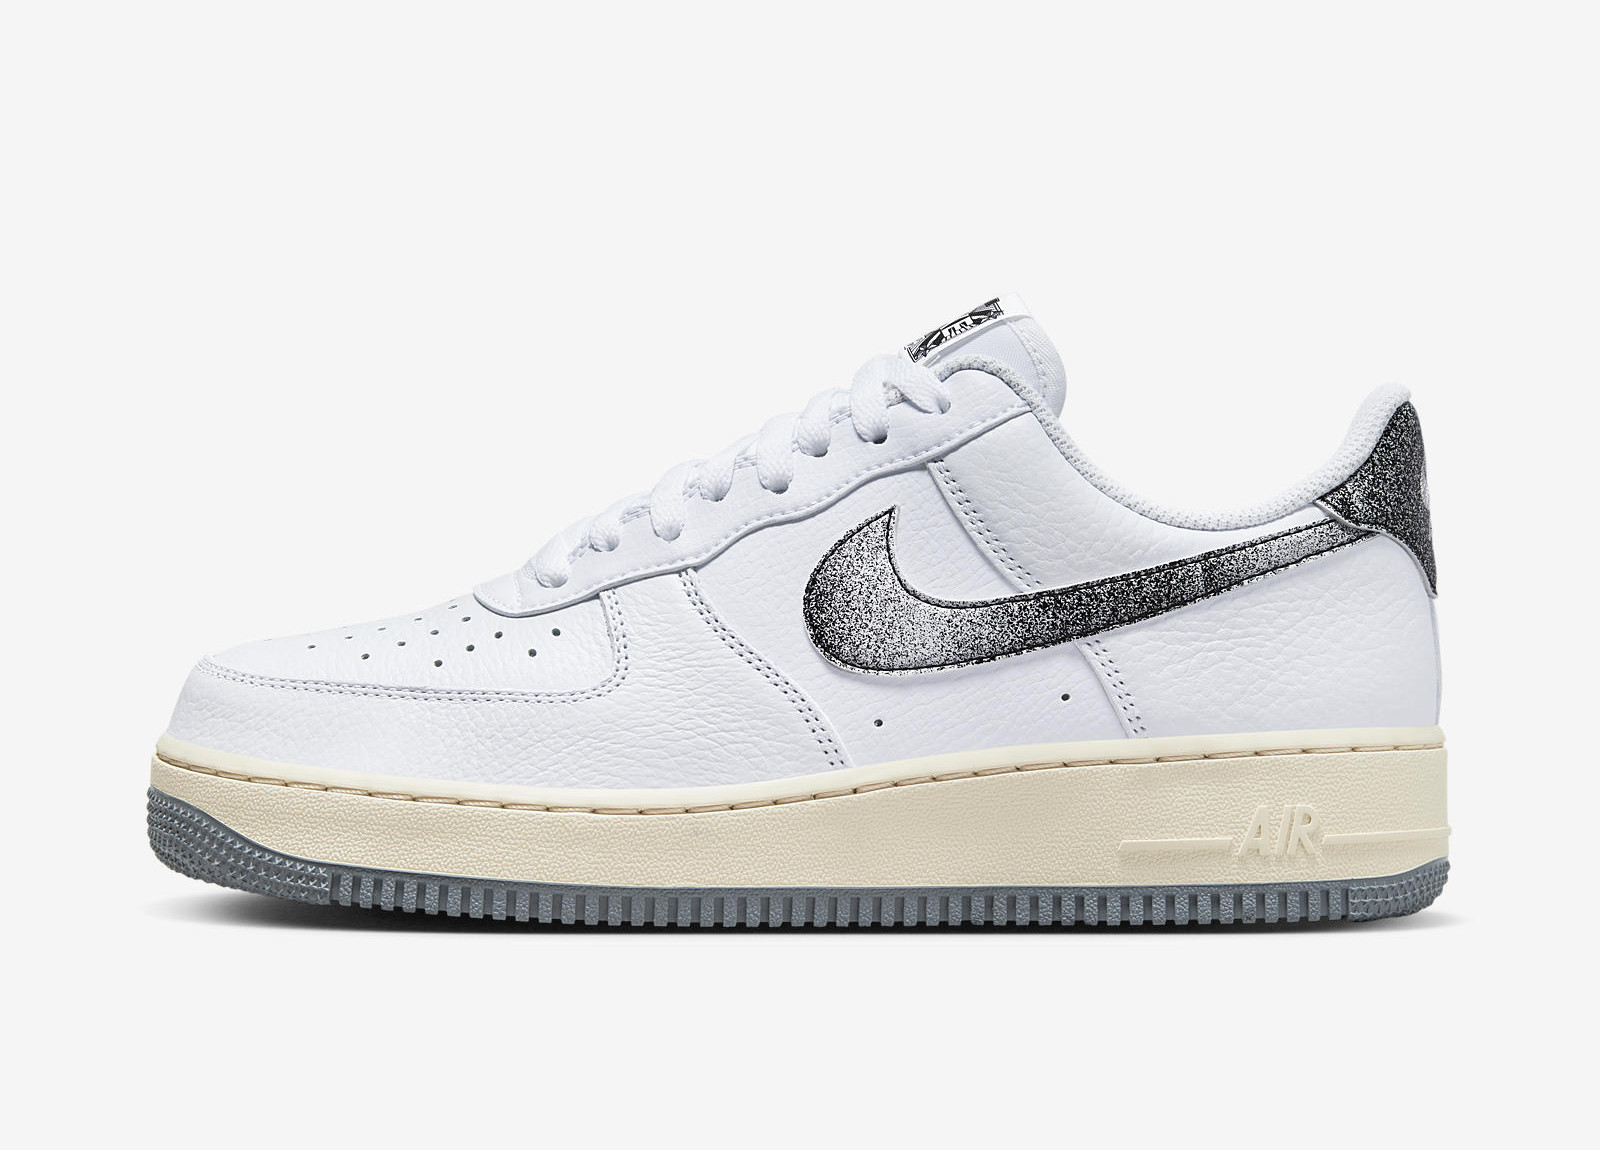 Nike Air Force 1
Low LX
50 Years of Hip Hop